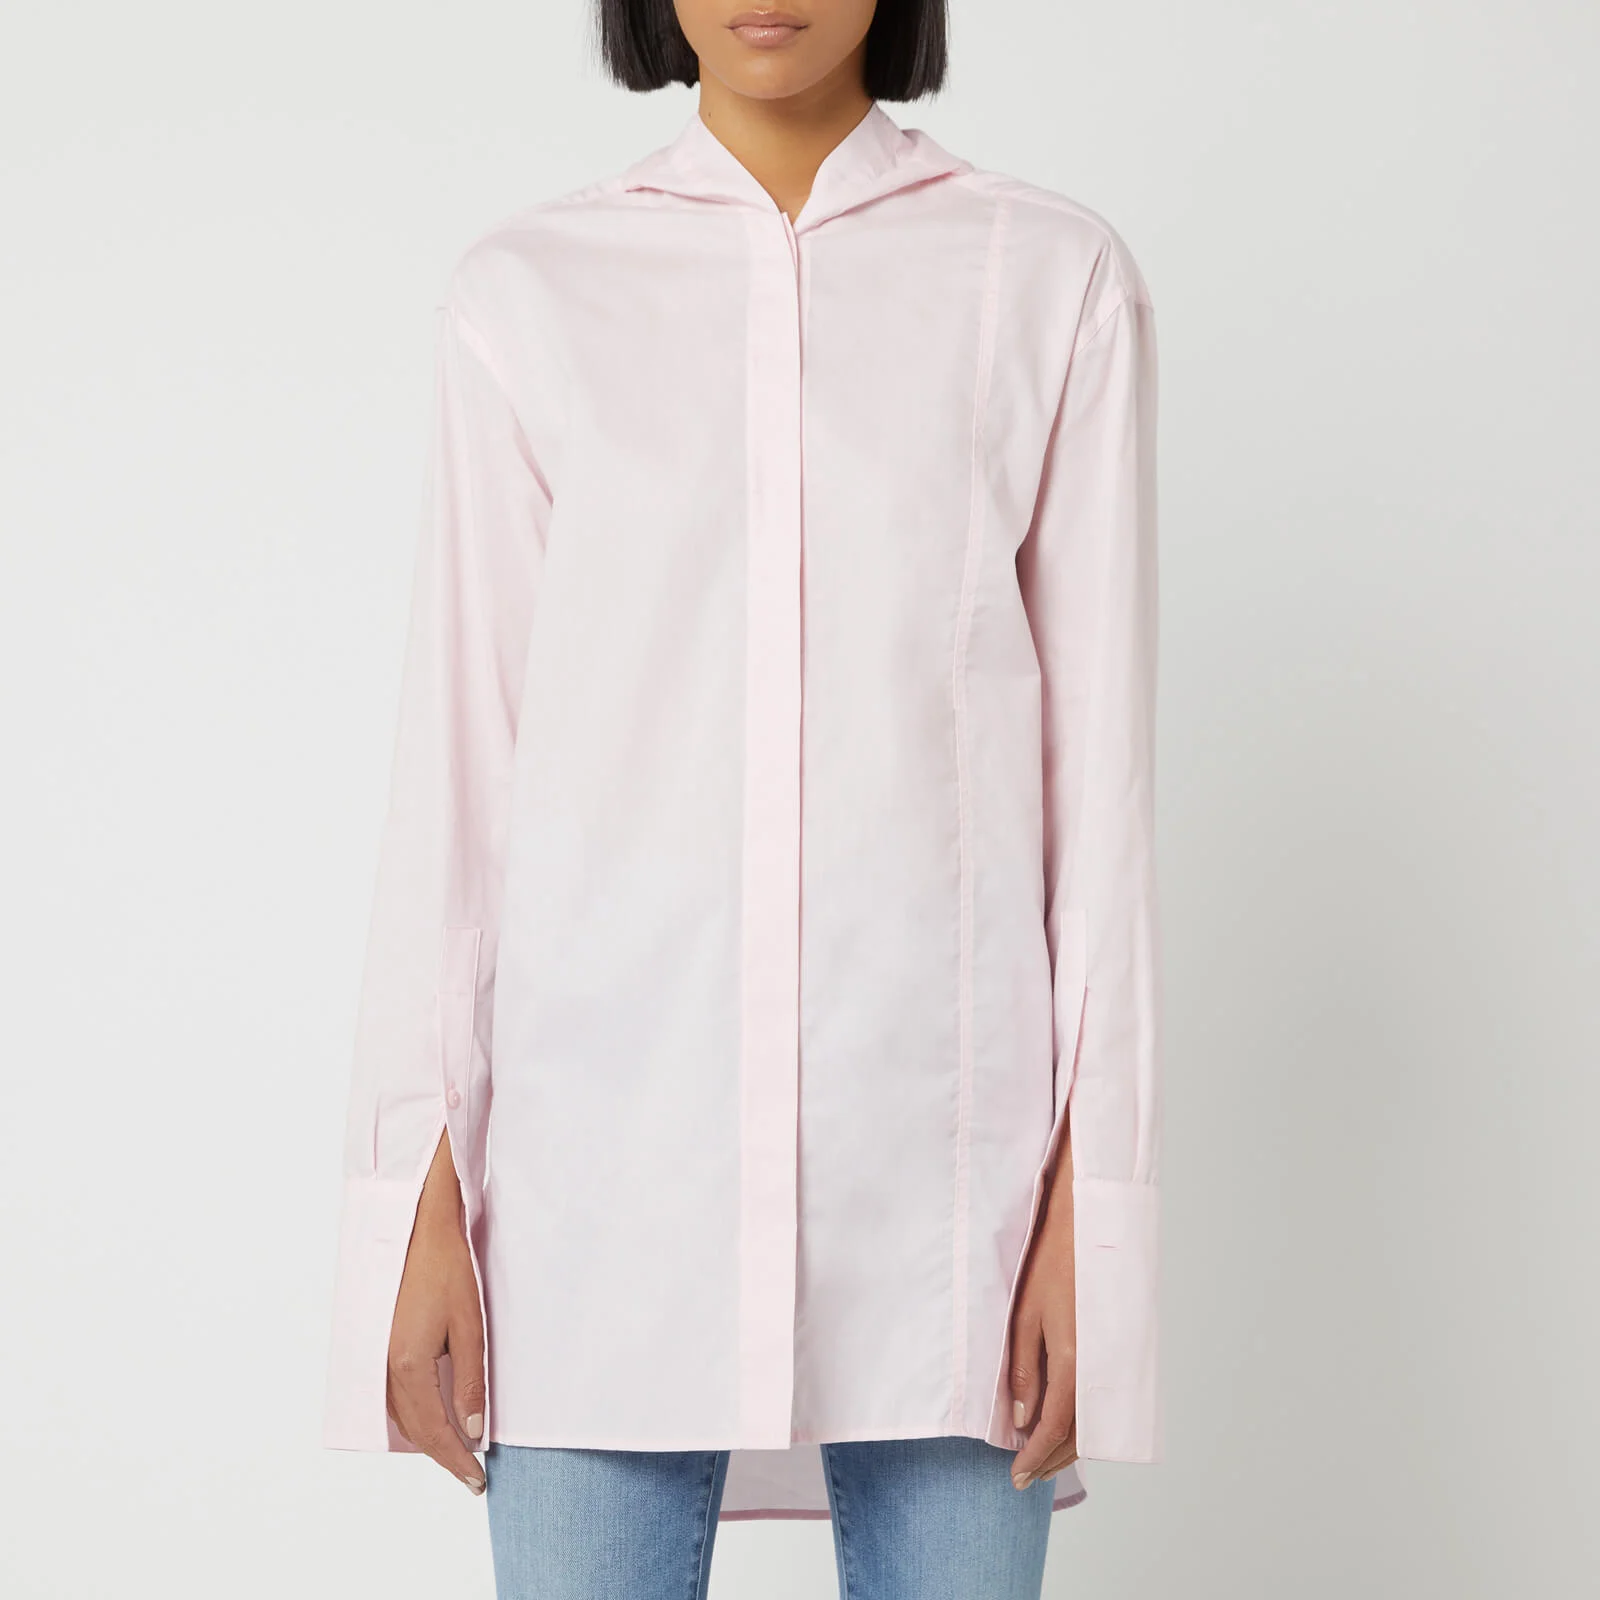 JW Anderson Women's Shirt with Back Tabs Detail - Pink Image 1